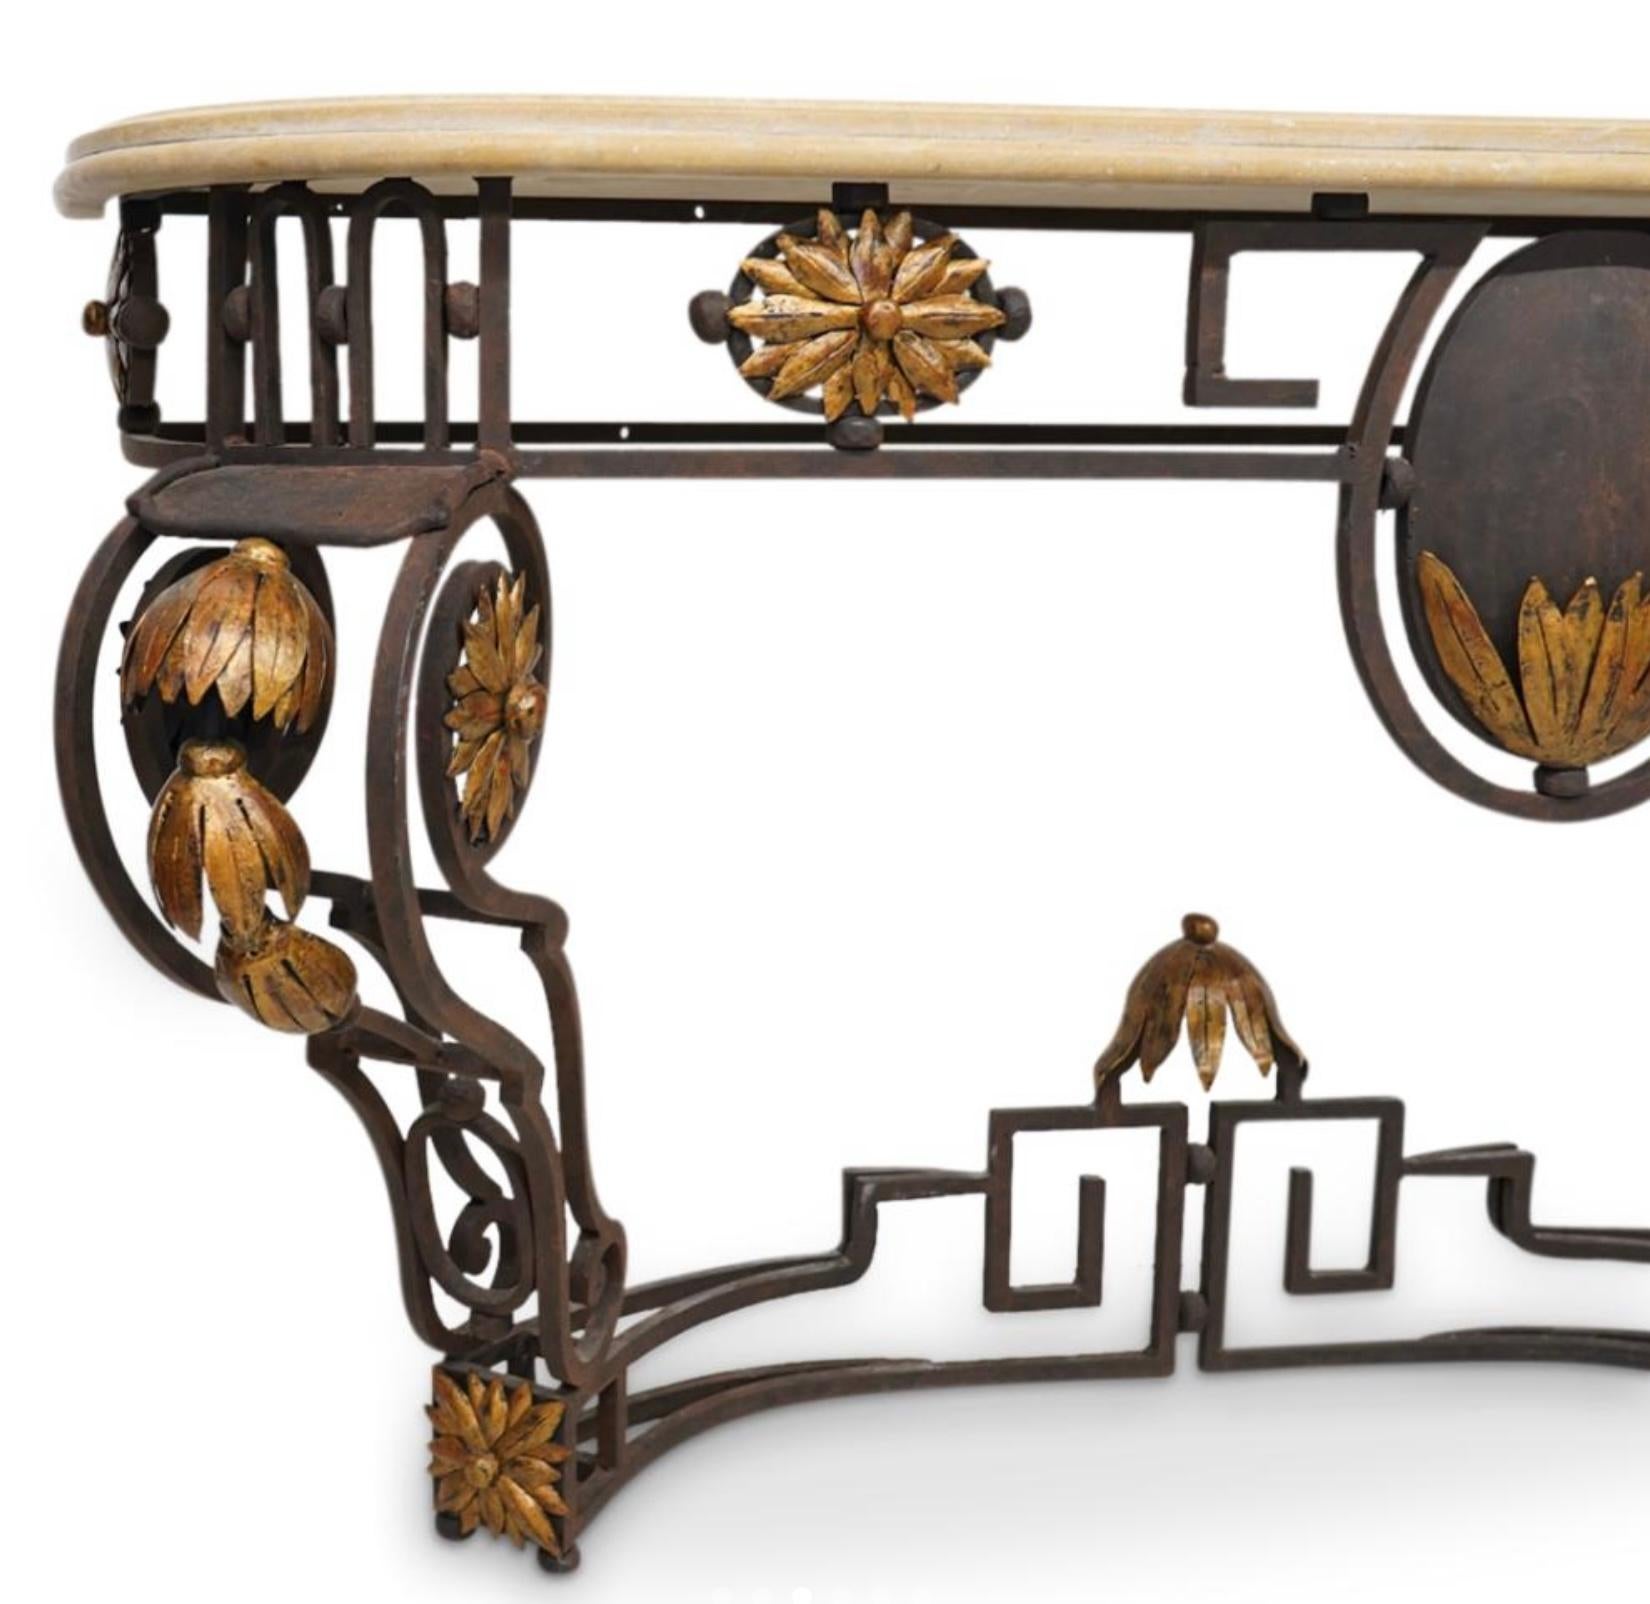 Baroque Large Scale Italian Gilt Iron Iron Wall Mounted Console Table with Stone Top For Sale